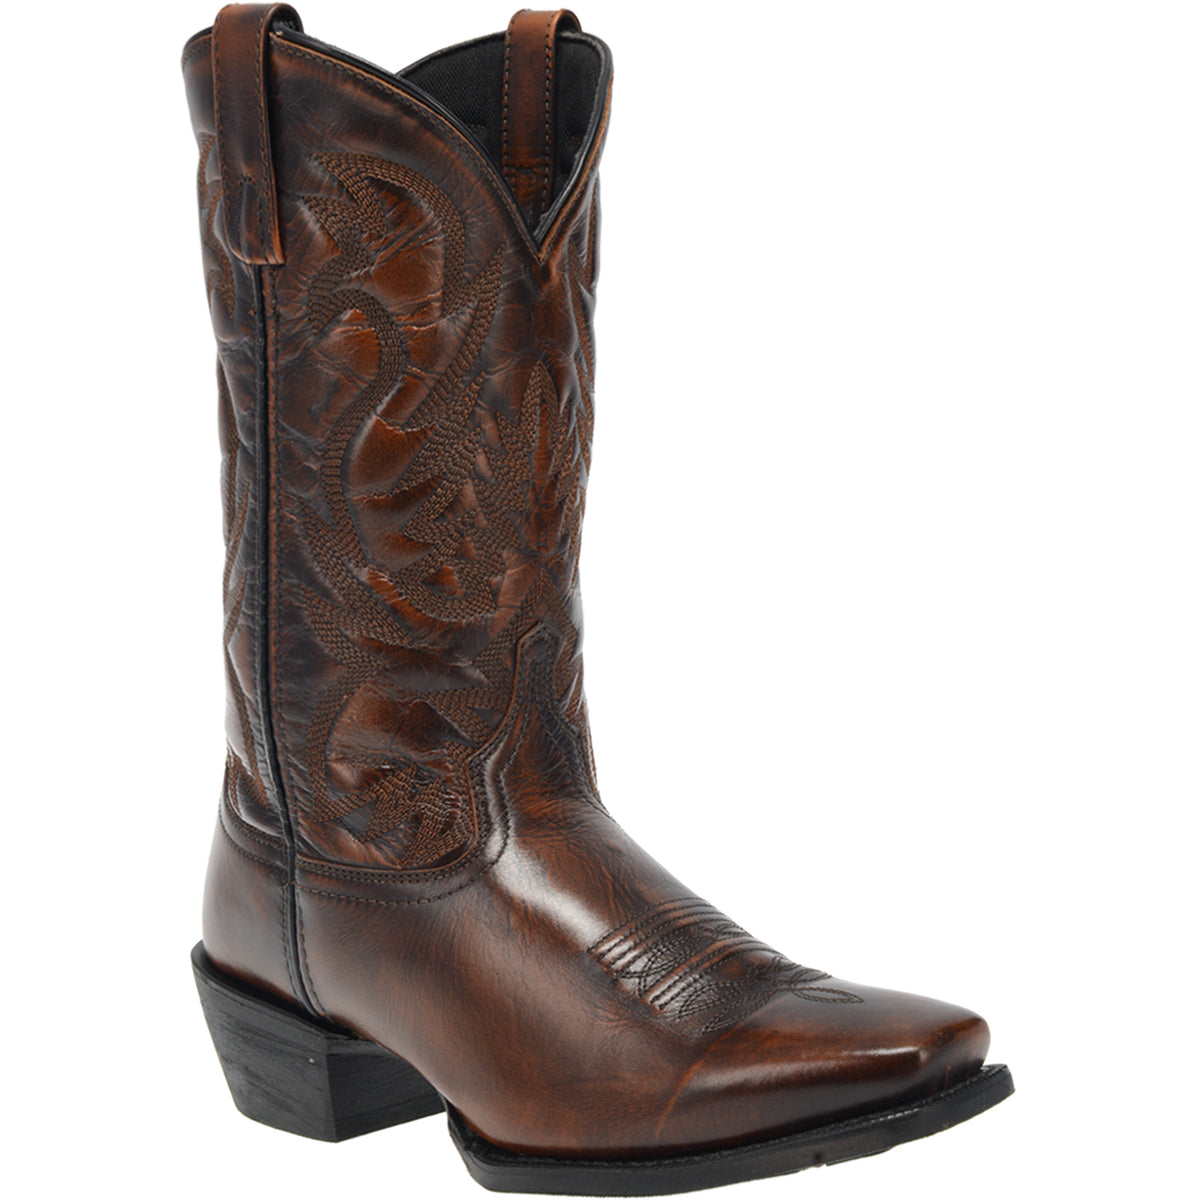 LAWTON LEATHER BOOT Cover